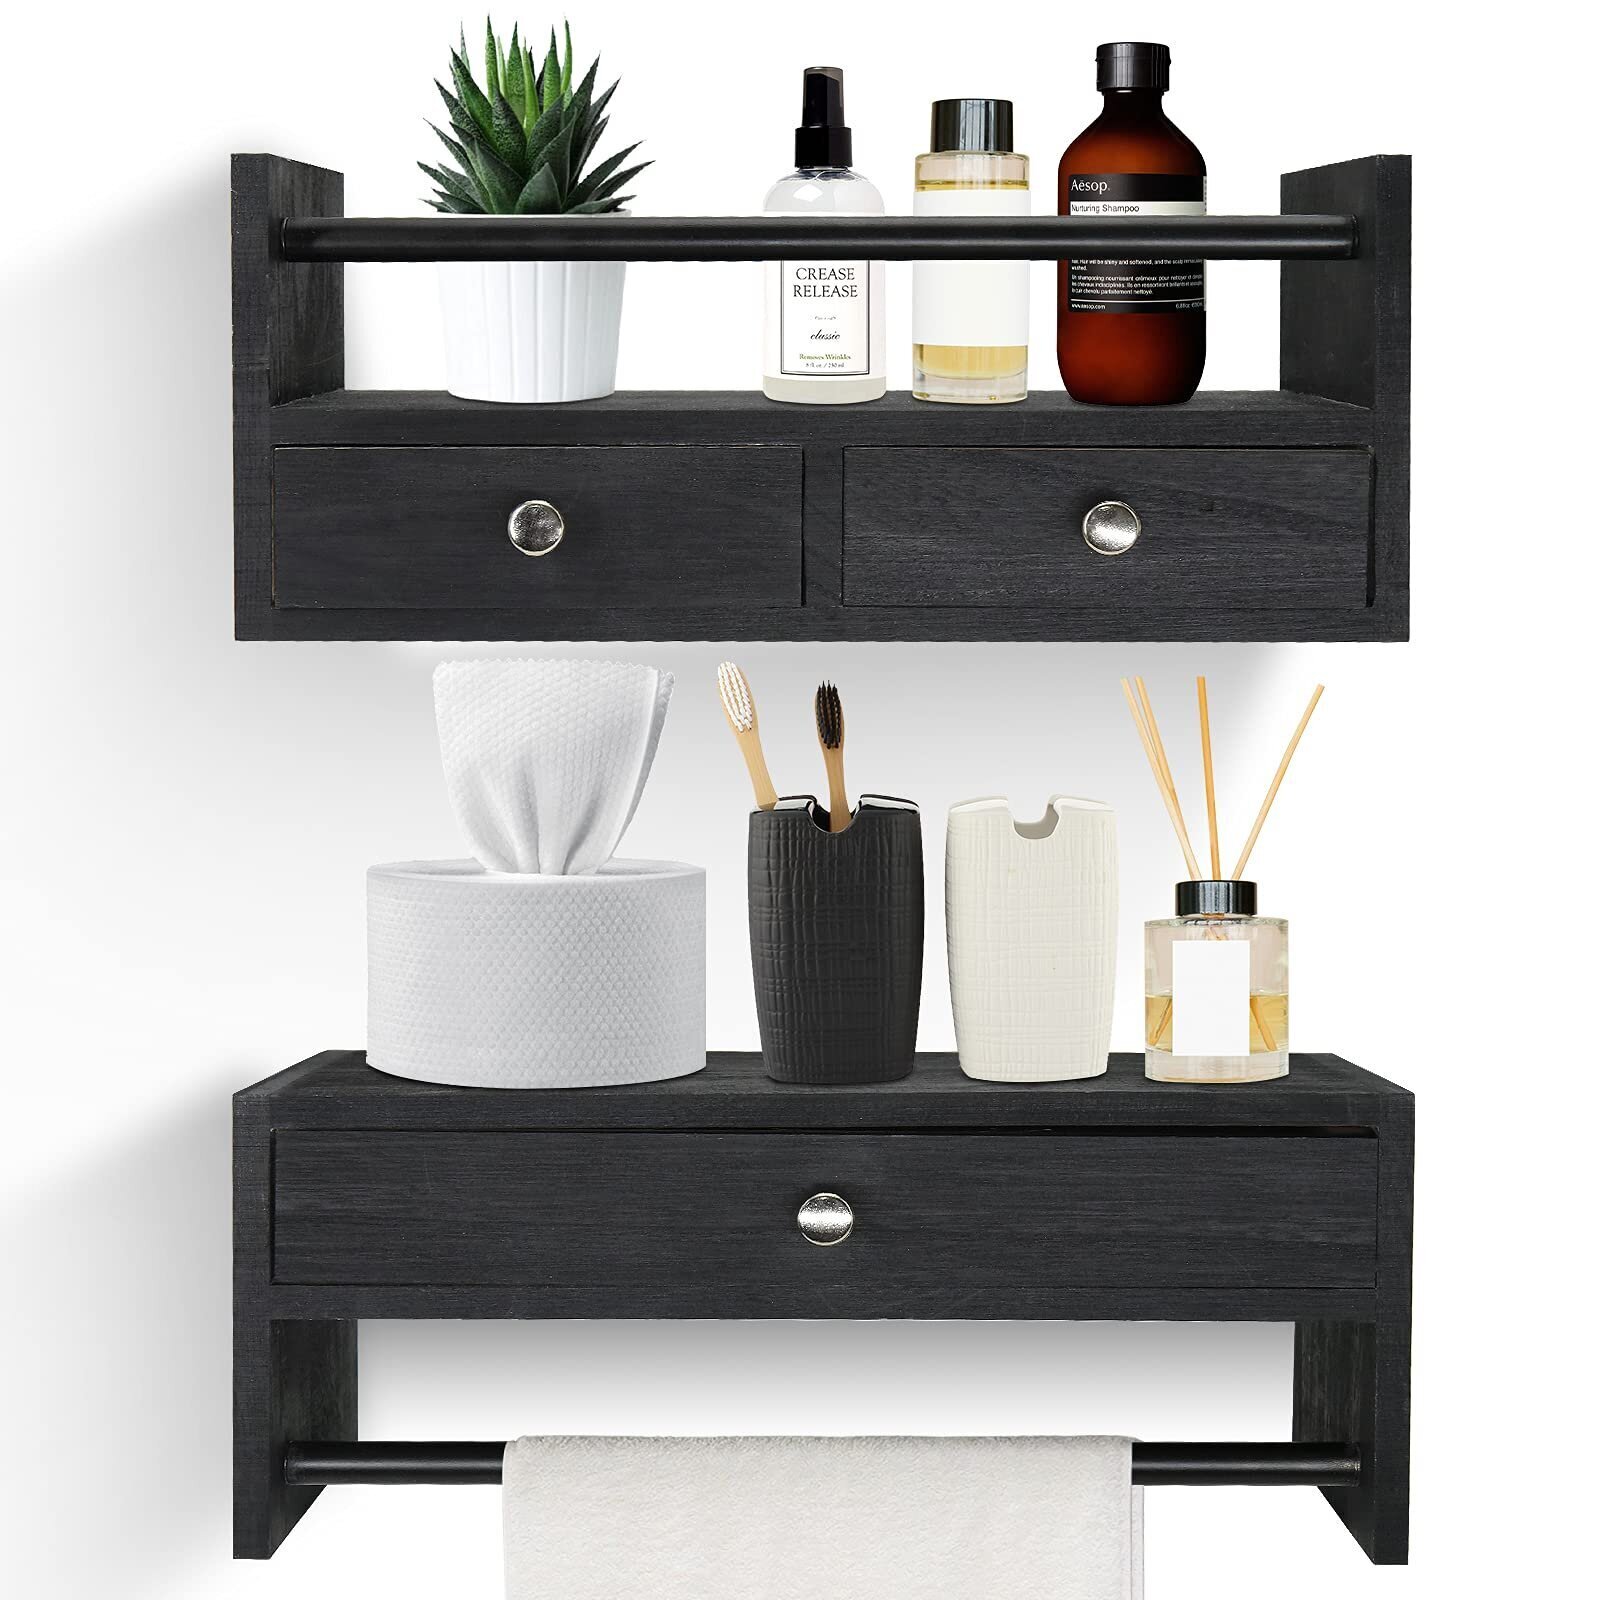 Set of Two Floating Shelves with Drawers